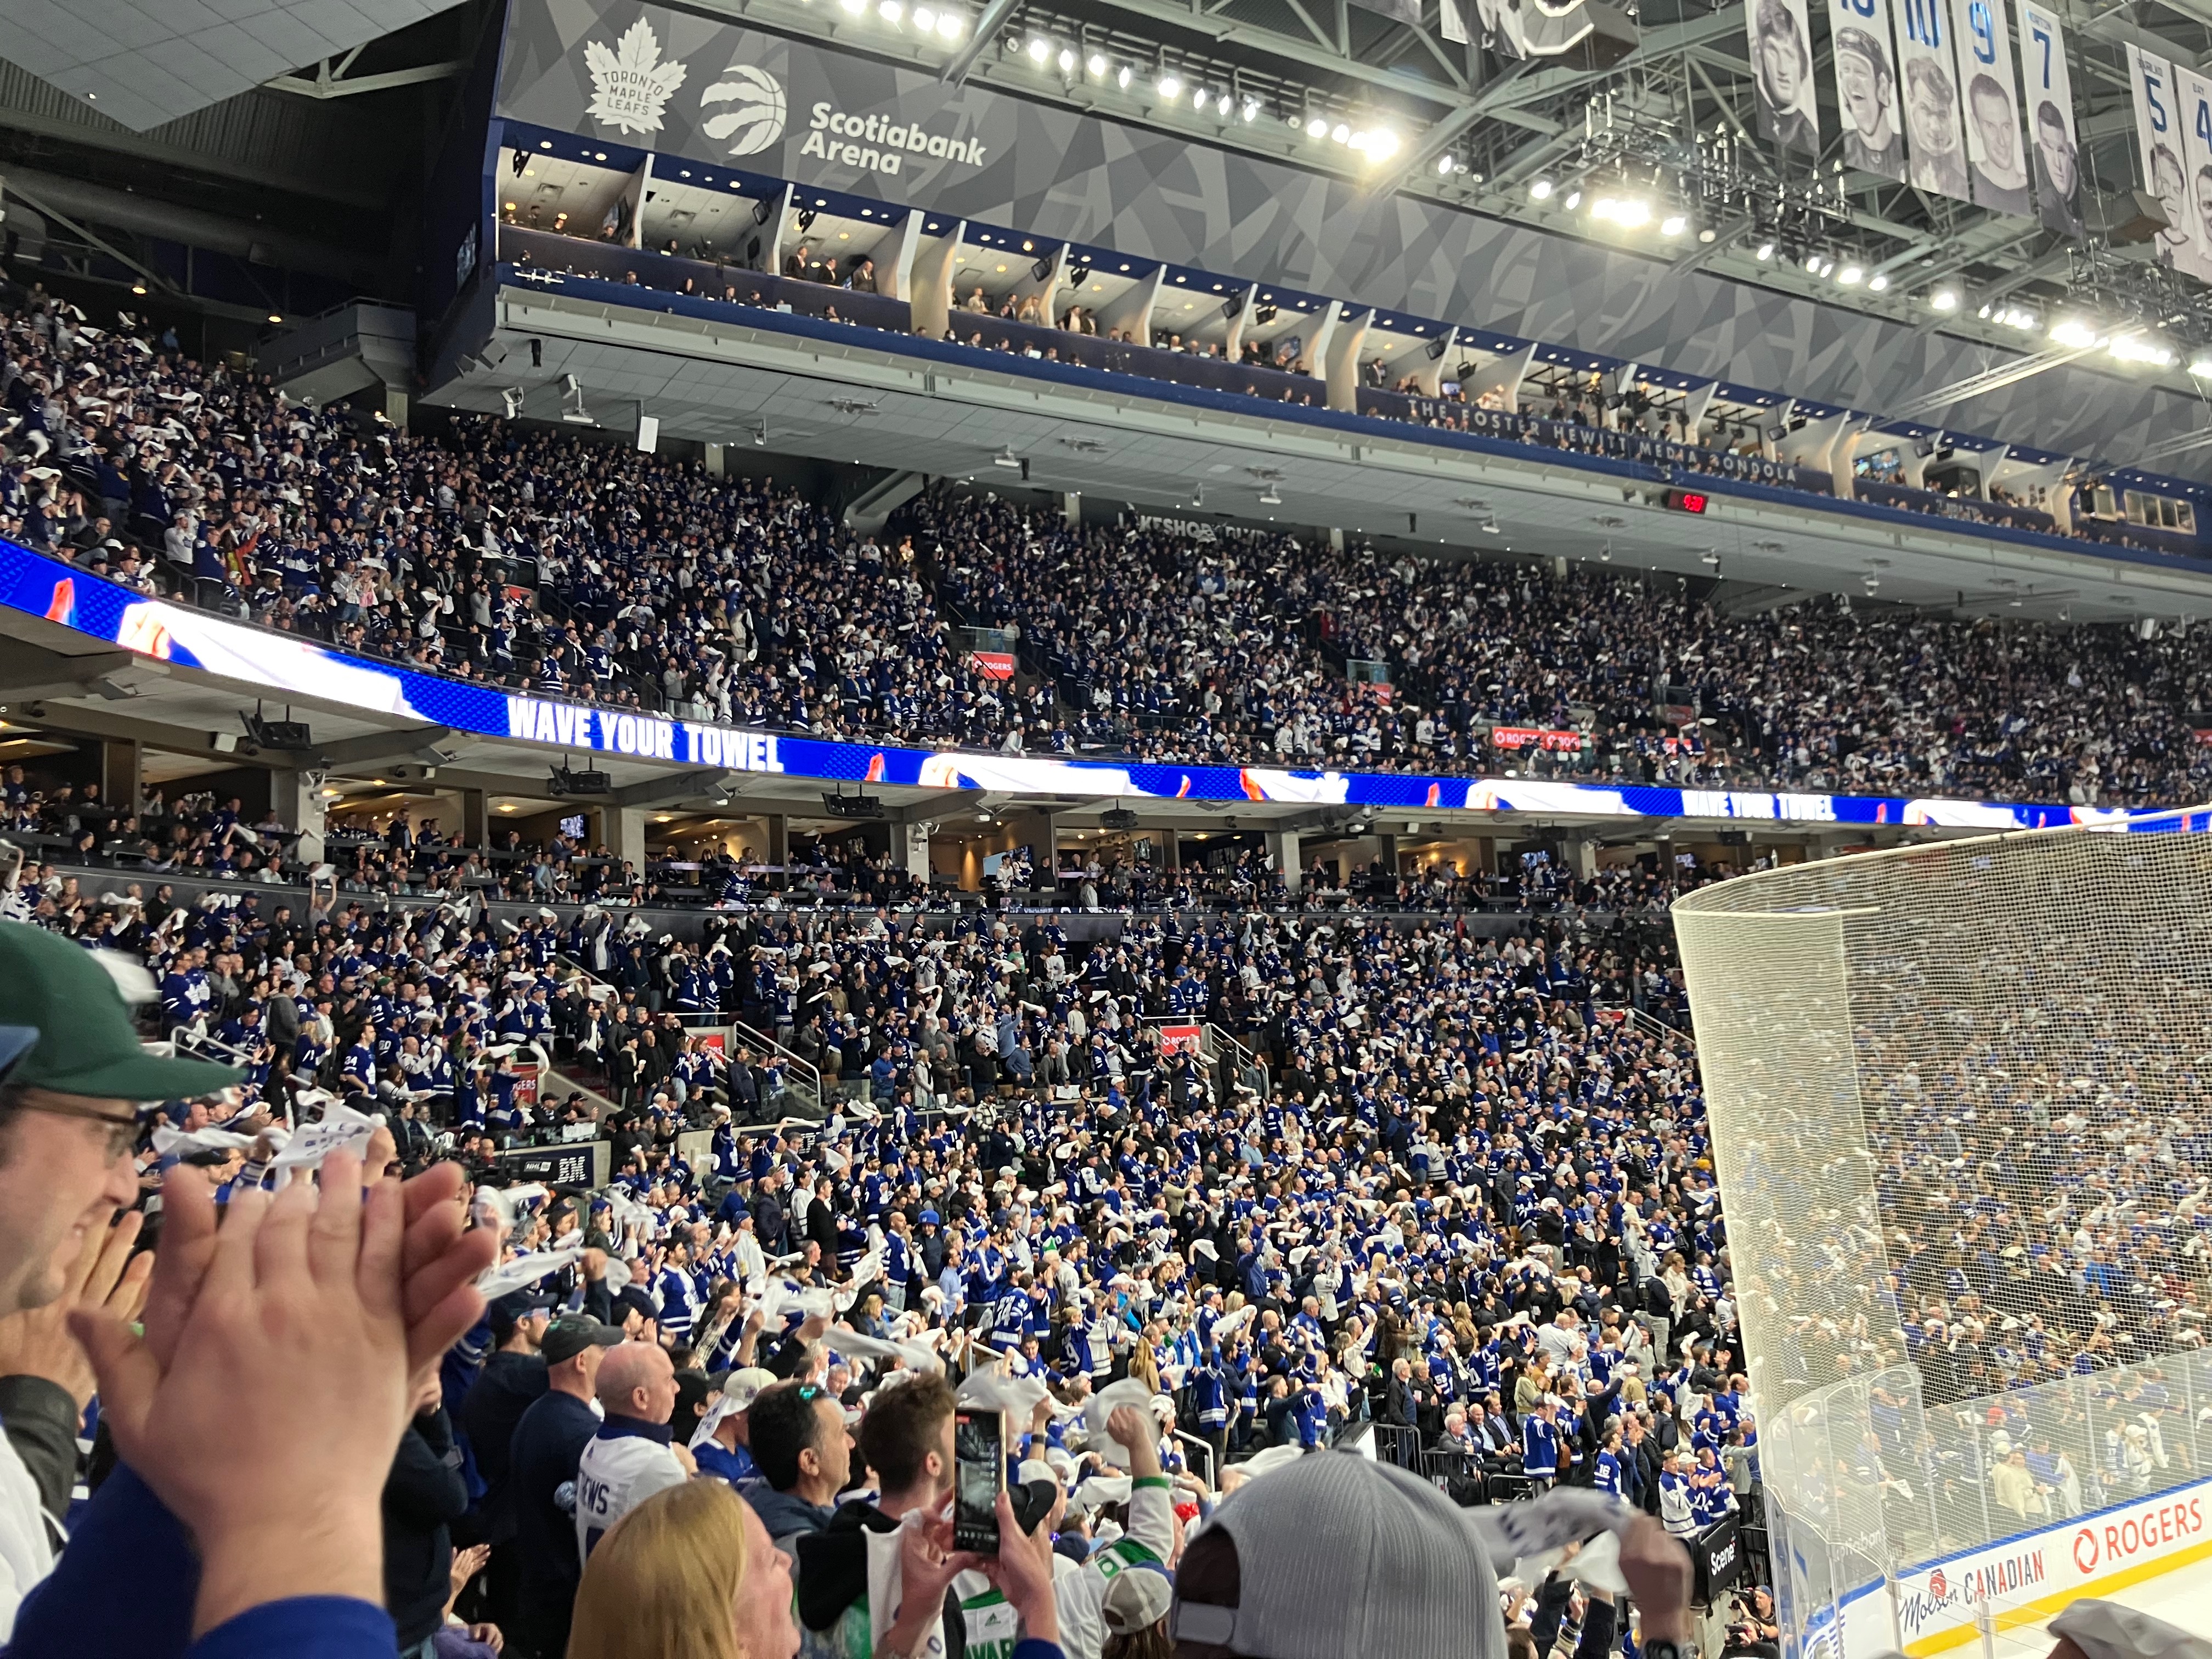 Fans try to will victory in the dying minutes, standing, cheering and waving towels in unison. | Oakville News